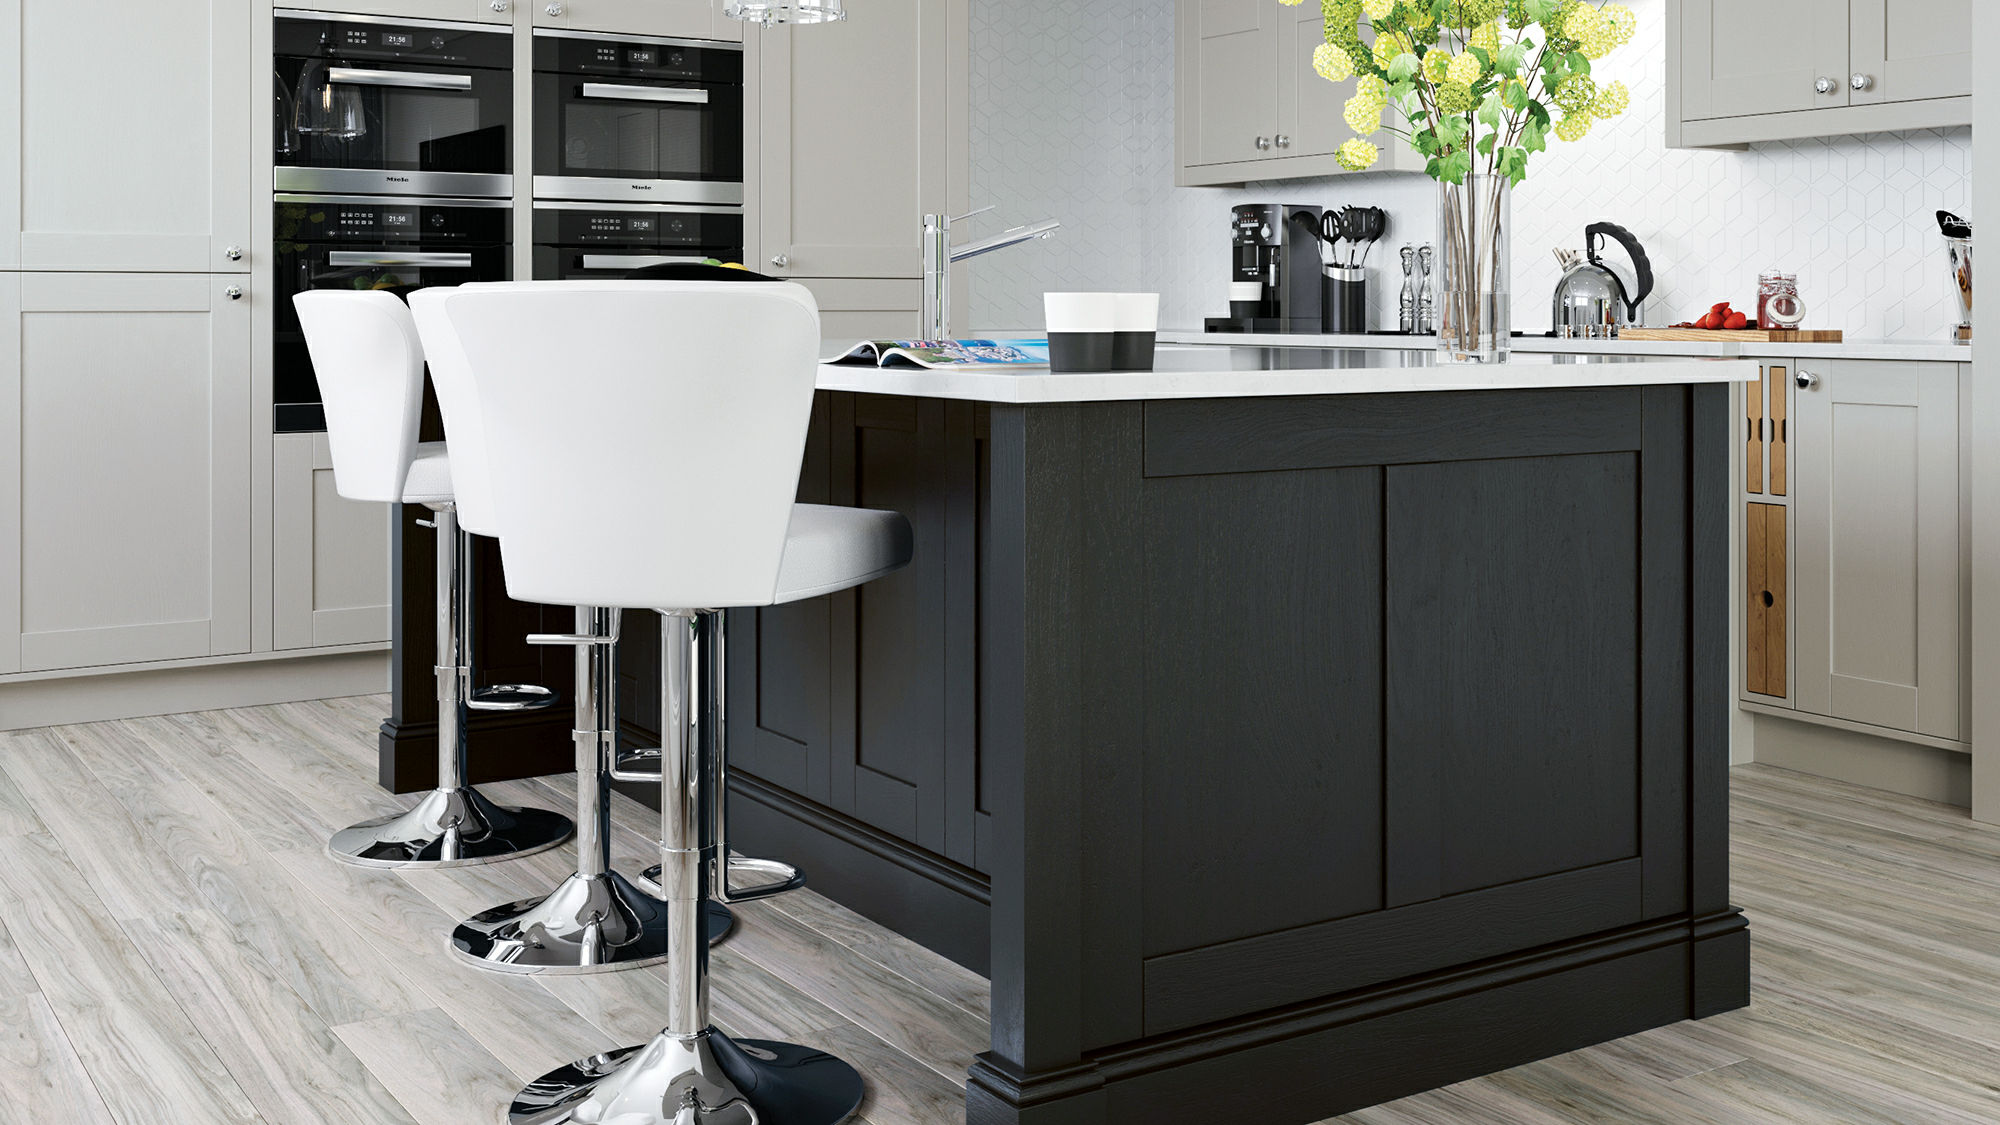 Madison solid wood graphite kitchens featuring sturdy construction and a statement dark grey shade